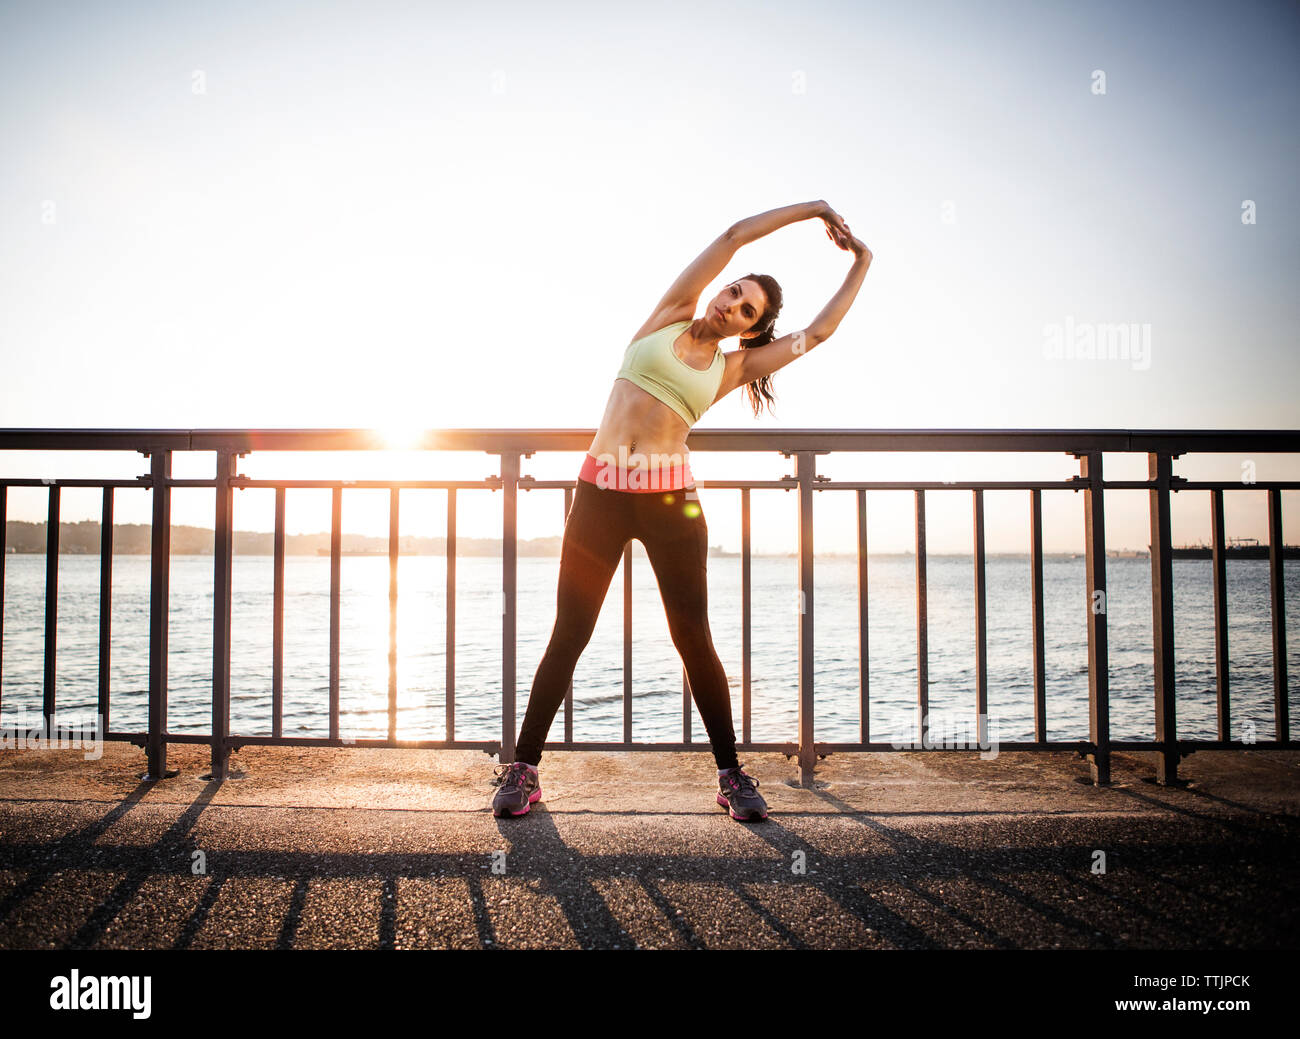 Athlete stretching with arms raised at railing by river against sky Stock Photo